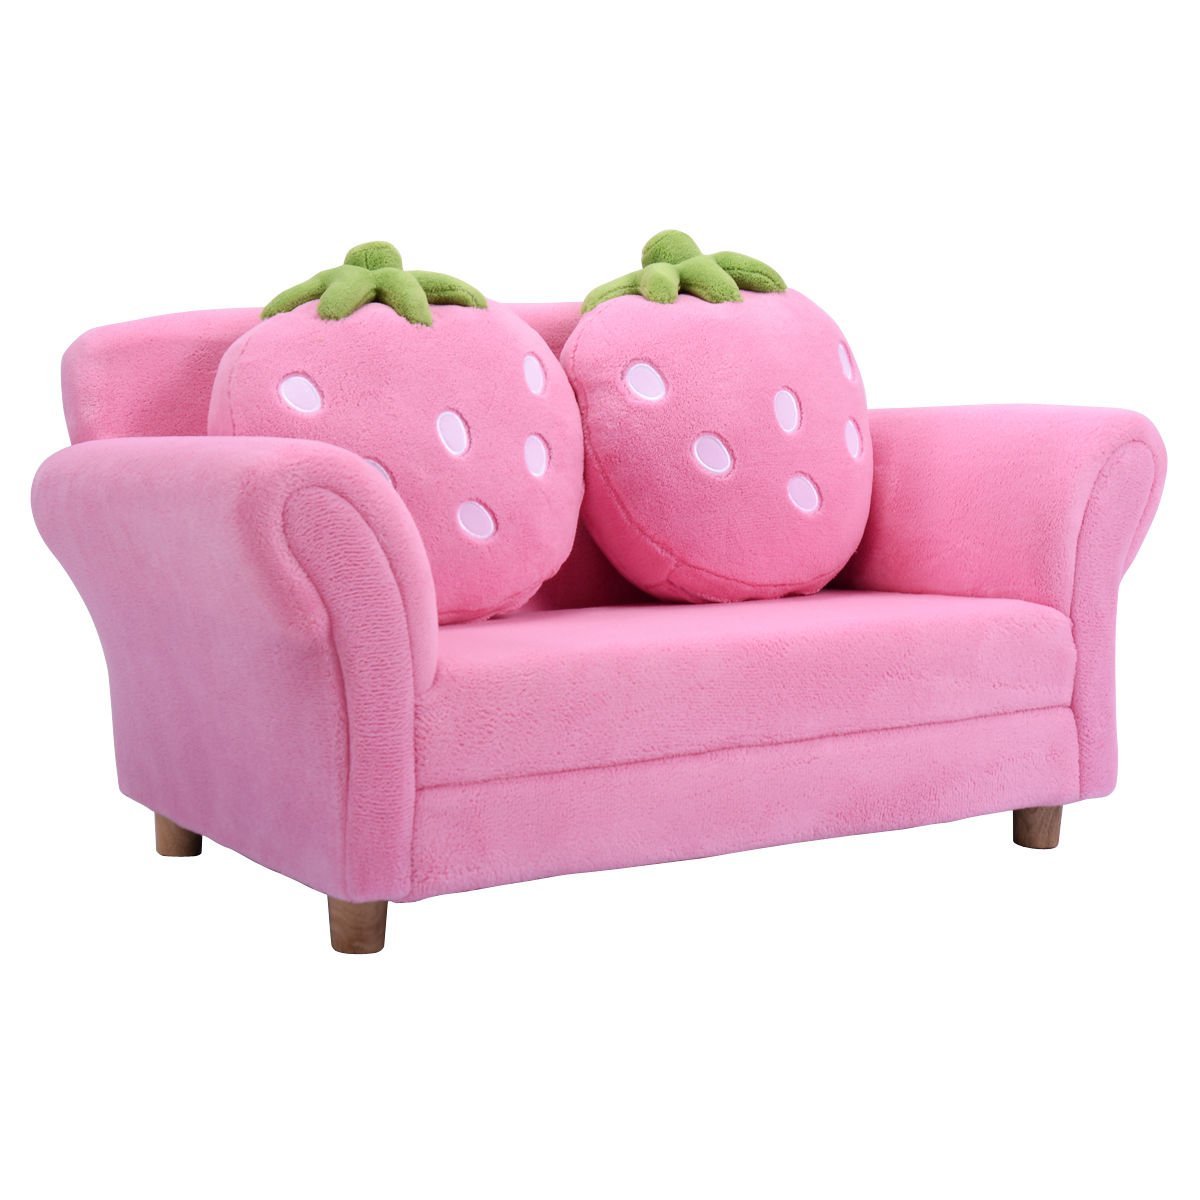 Costzon Kids Pink Sofa Set Children Armrest Chair Lounge Couch w/2 Cushions (Pink)